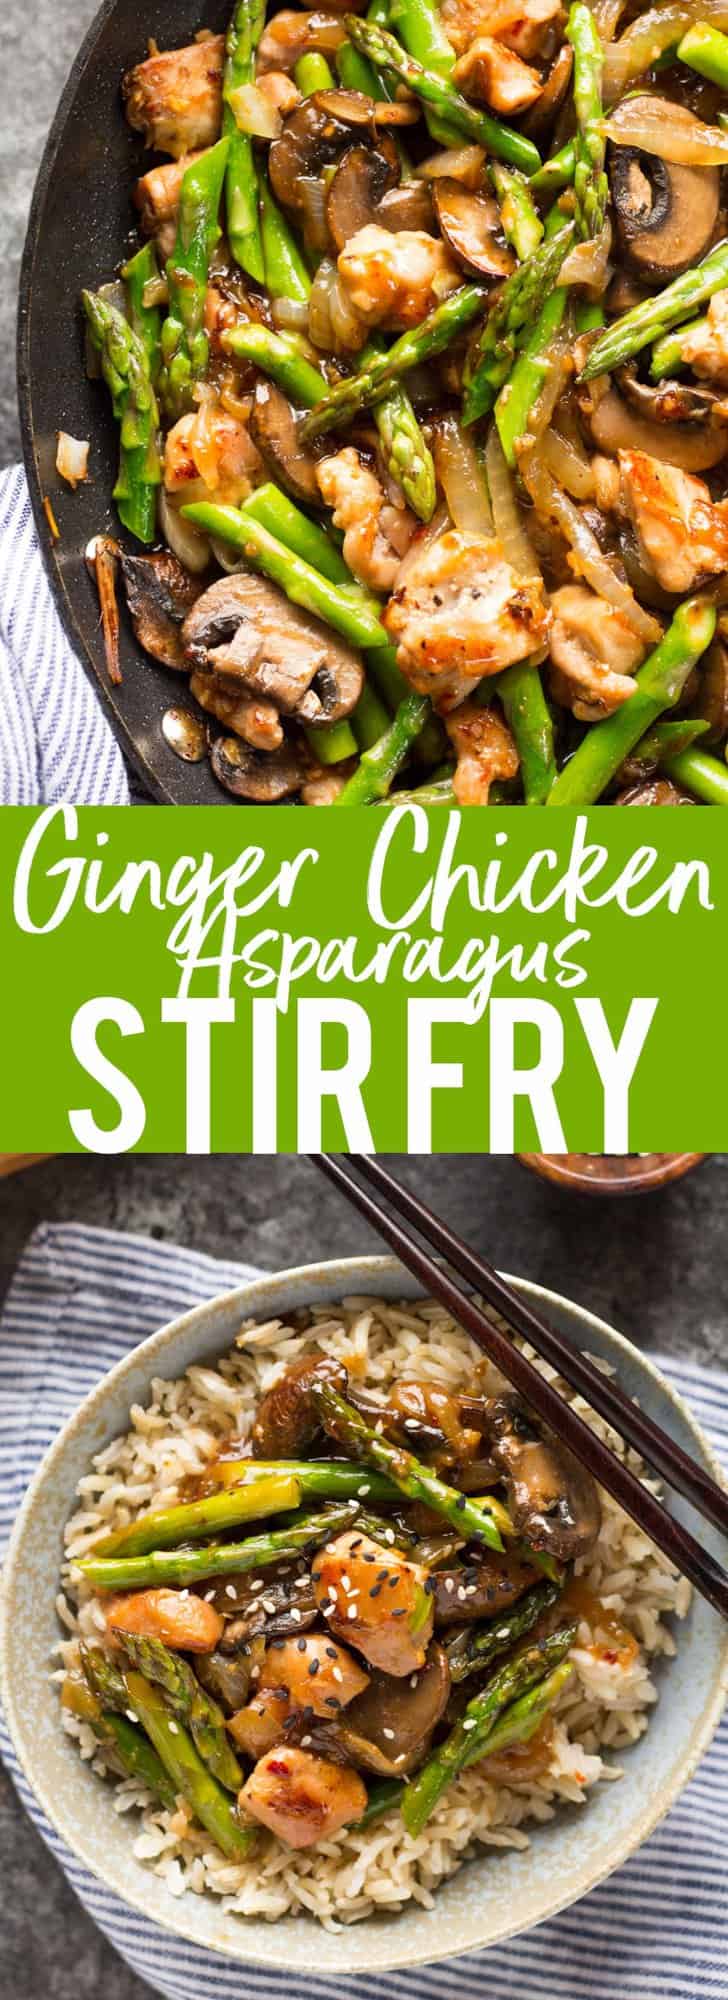 This Ginger Chicken Asparagus Stir Fry is a quick and healthy dinner.